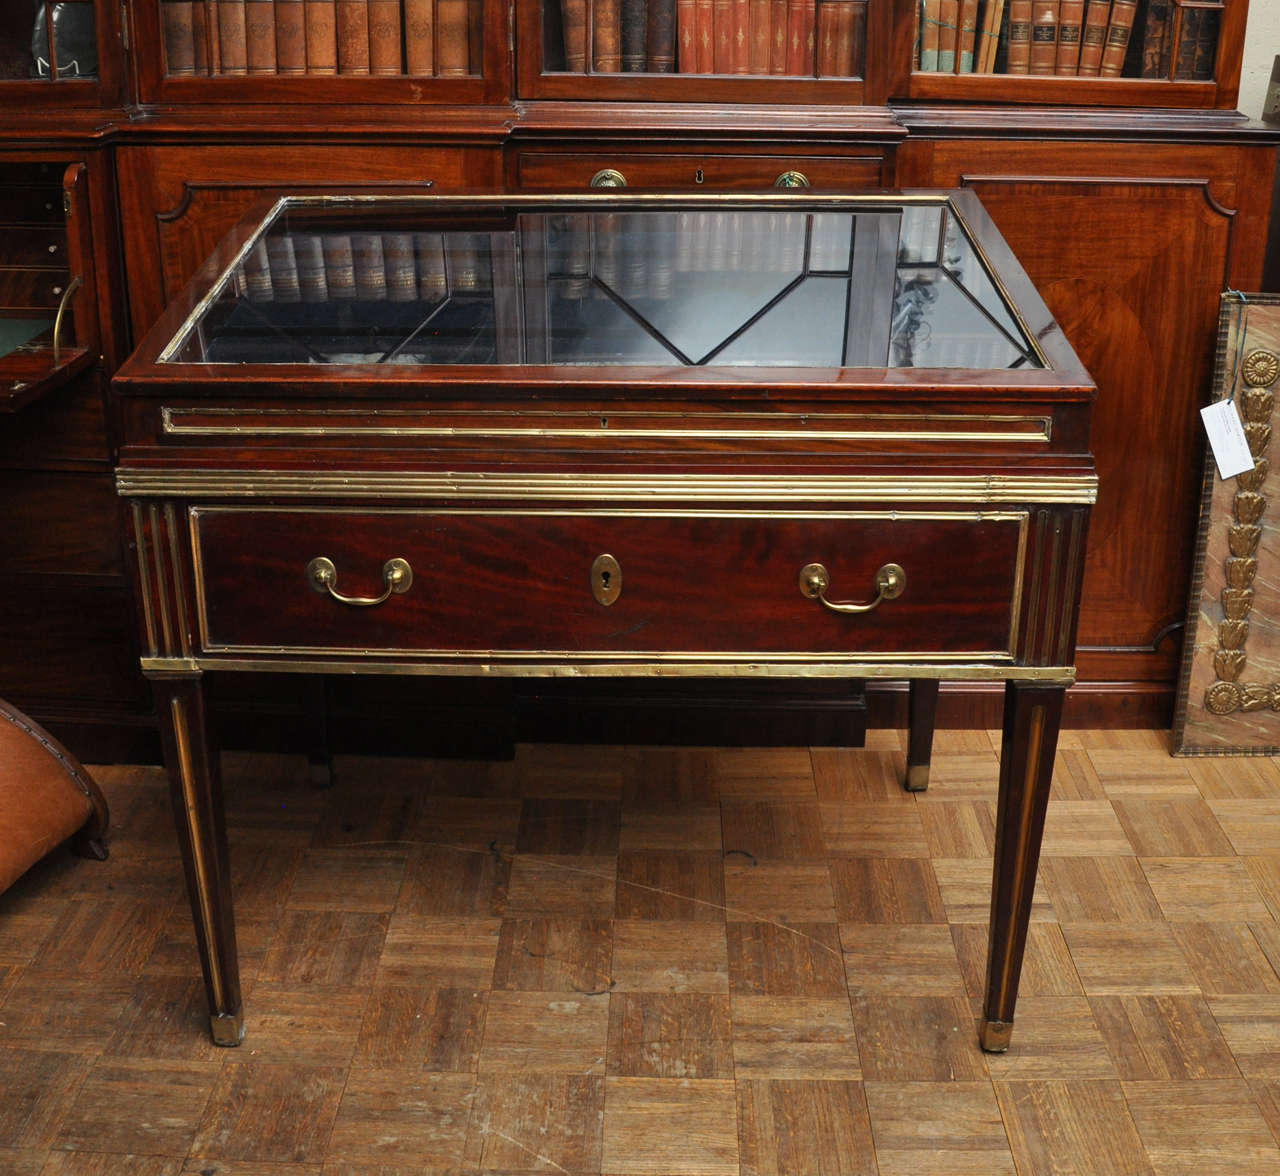 Russian Neo-Classical Style Gilt-Brass and Mahogany Vitrine / Display Case, Circa 1830, in the Louis XVI taste, with Glass Cover and large drawer with keys. Free-standing. Ideal for a serious collector and/or library. Height at front: 35.75 in.